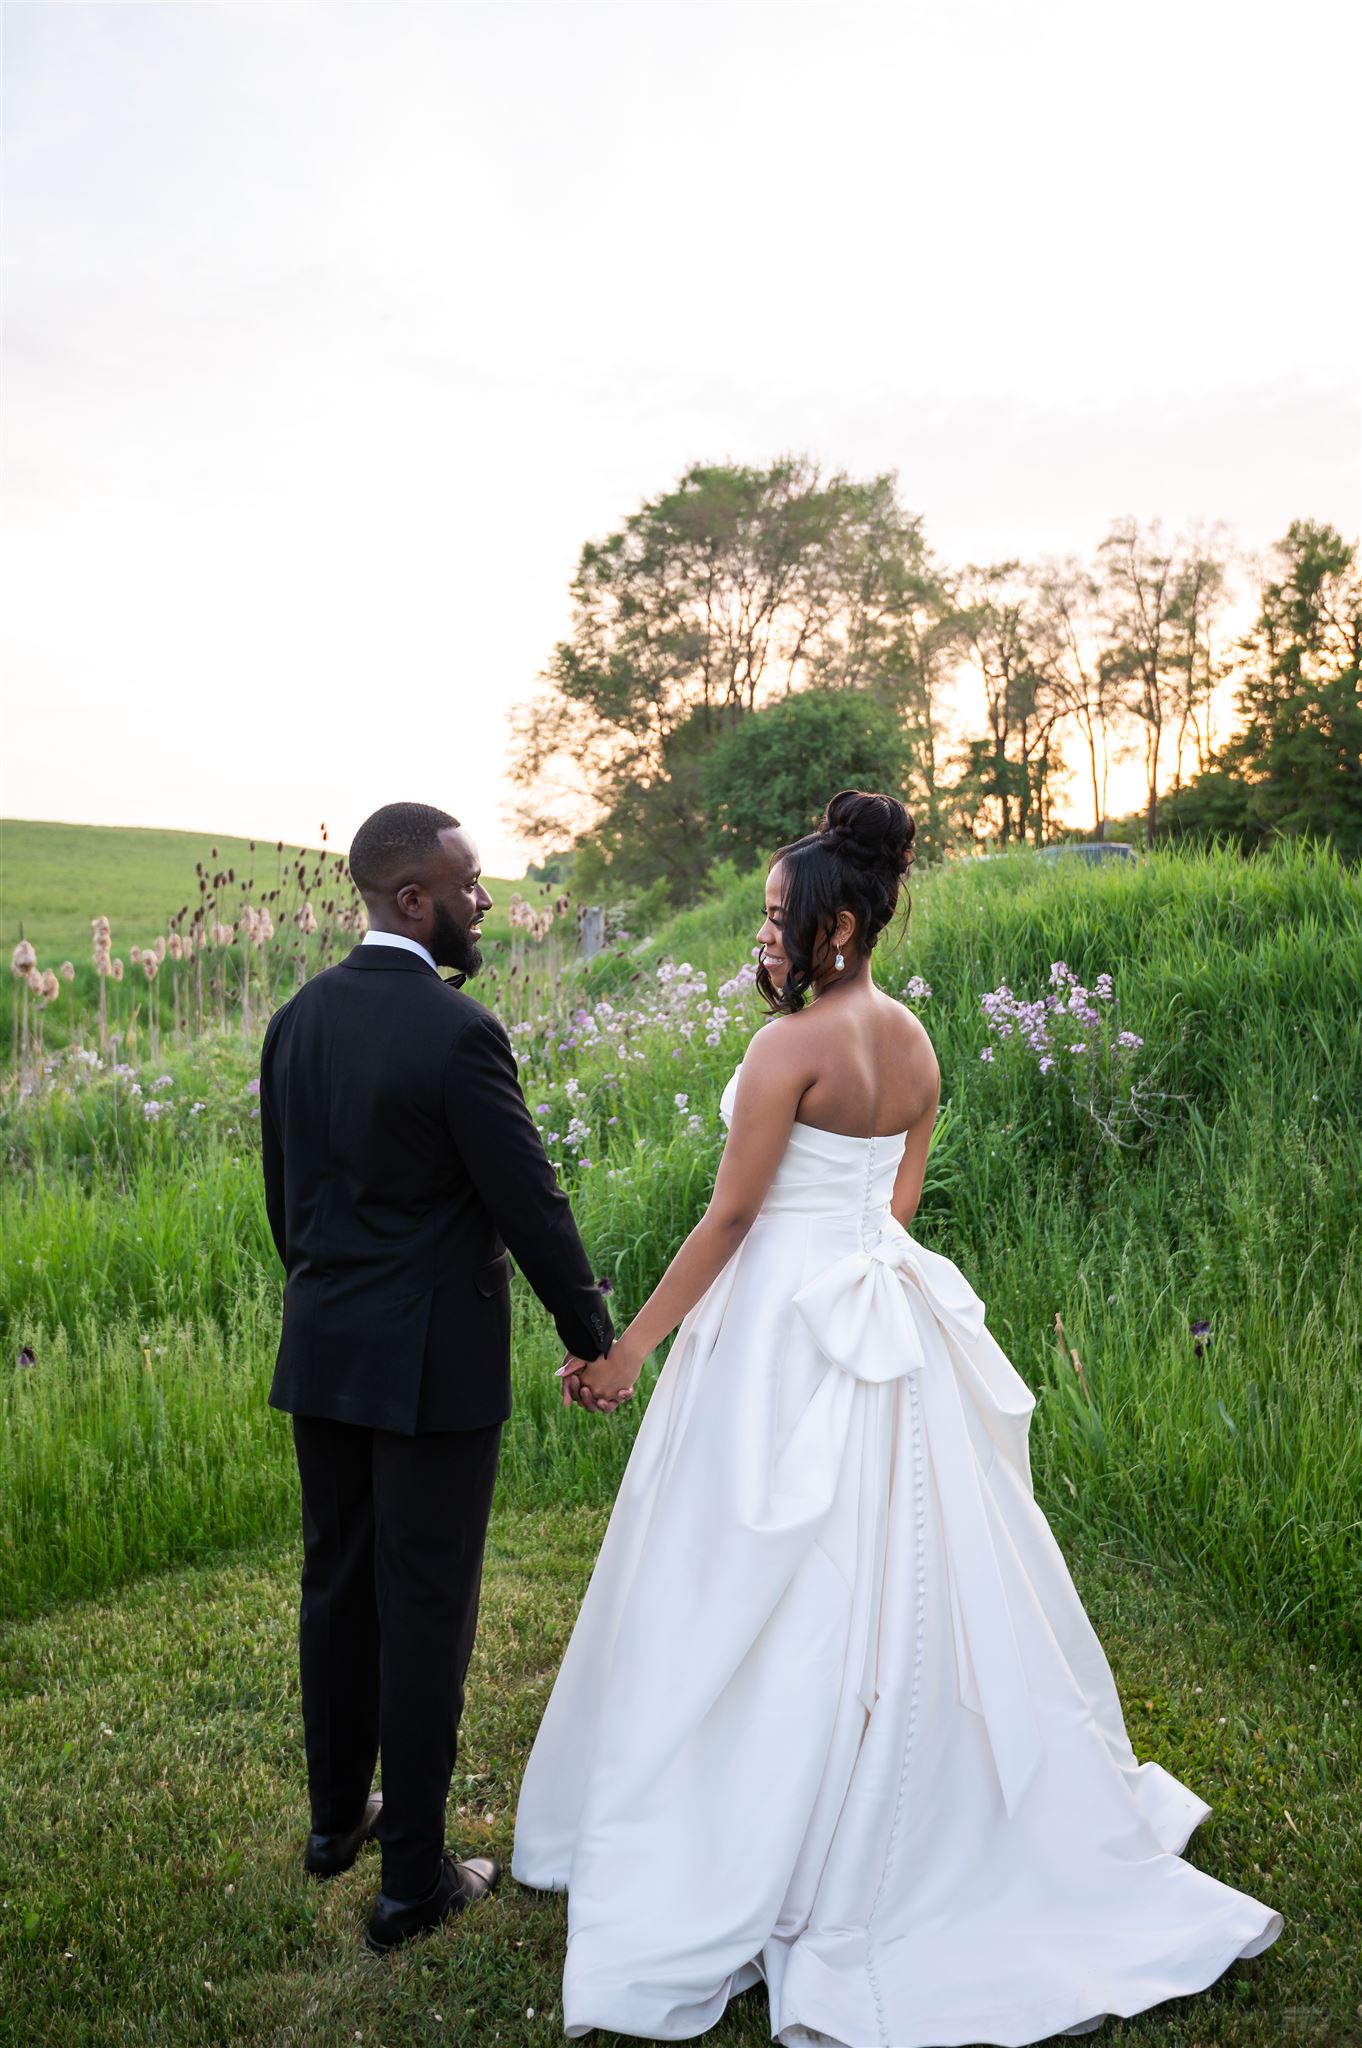 A Something Blue-Filled Wedding in Canada: Keia & Michael